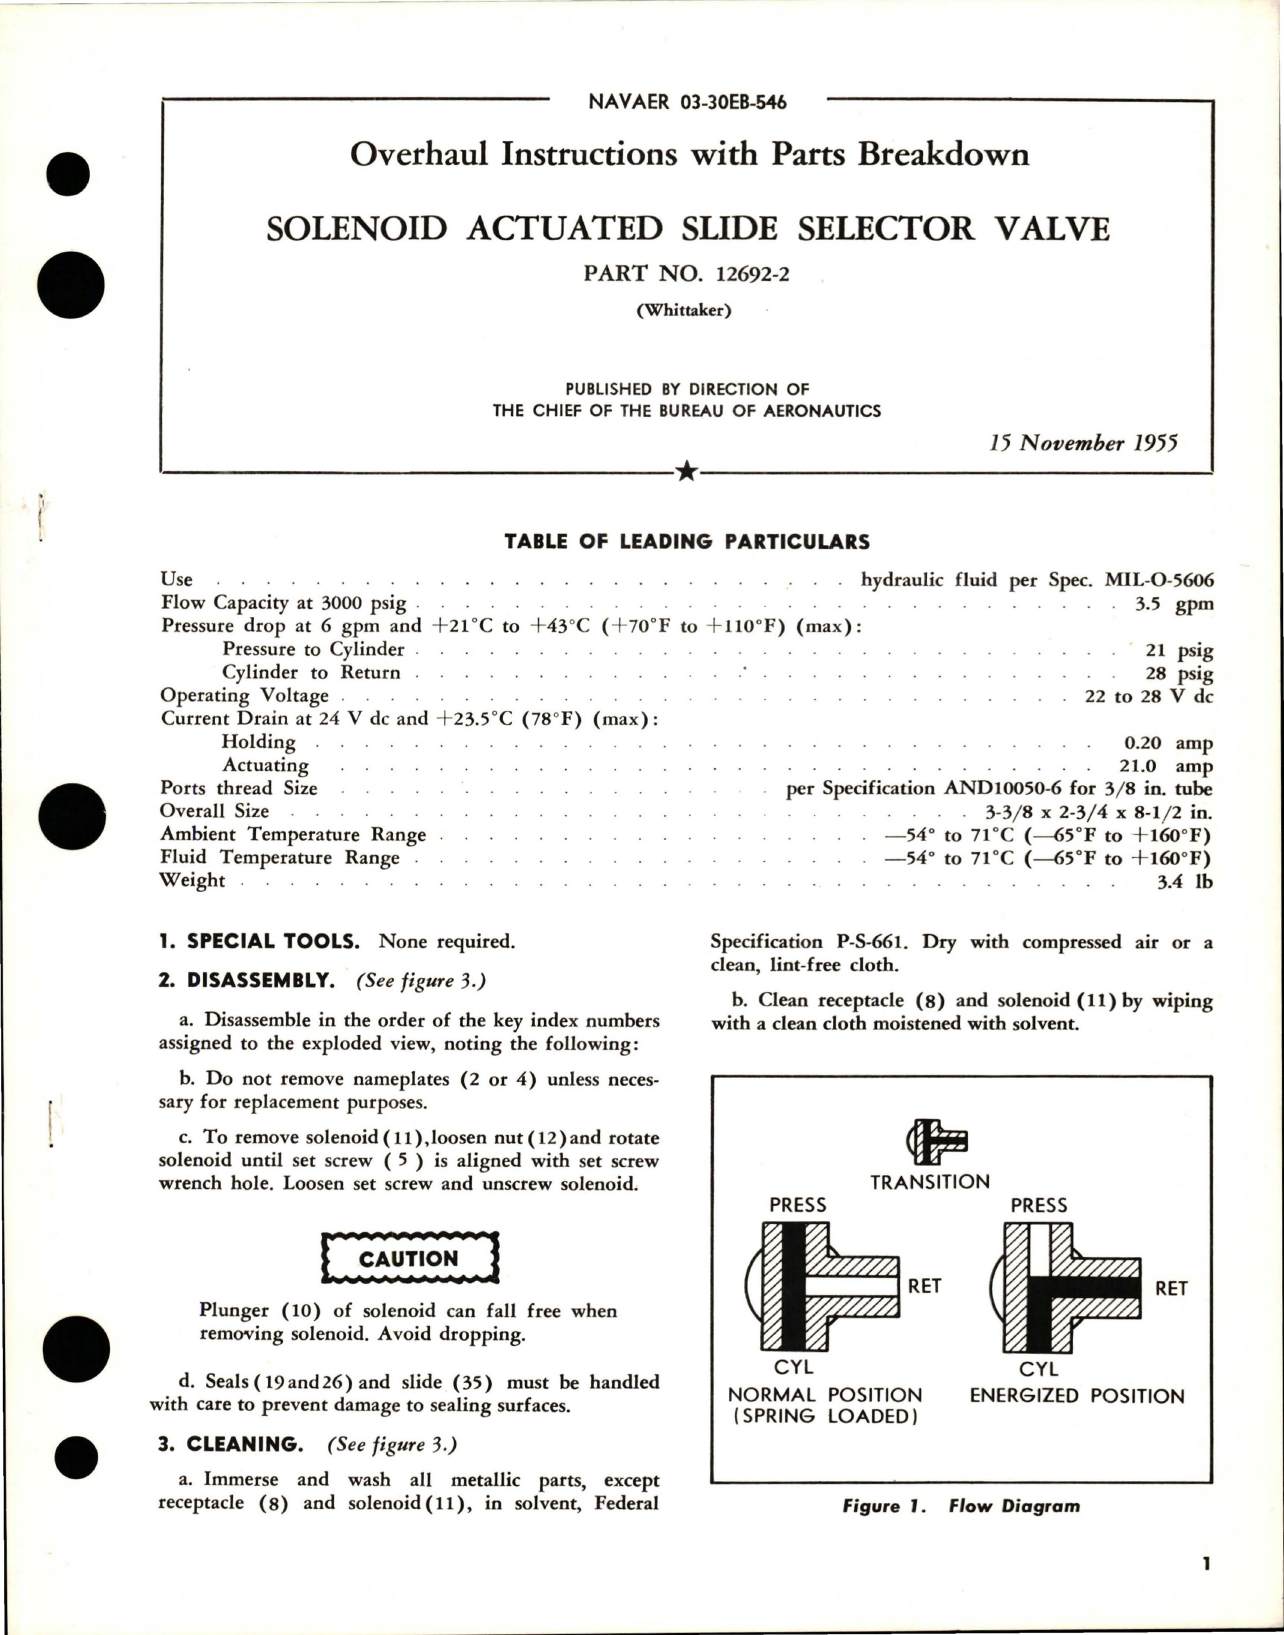 Sample page 1 from AirCorps Library document: Overhaul Instructions with Parts for Solenoid Actuated Slide Selector Valve - Part 12692-2